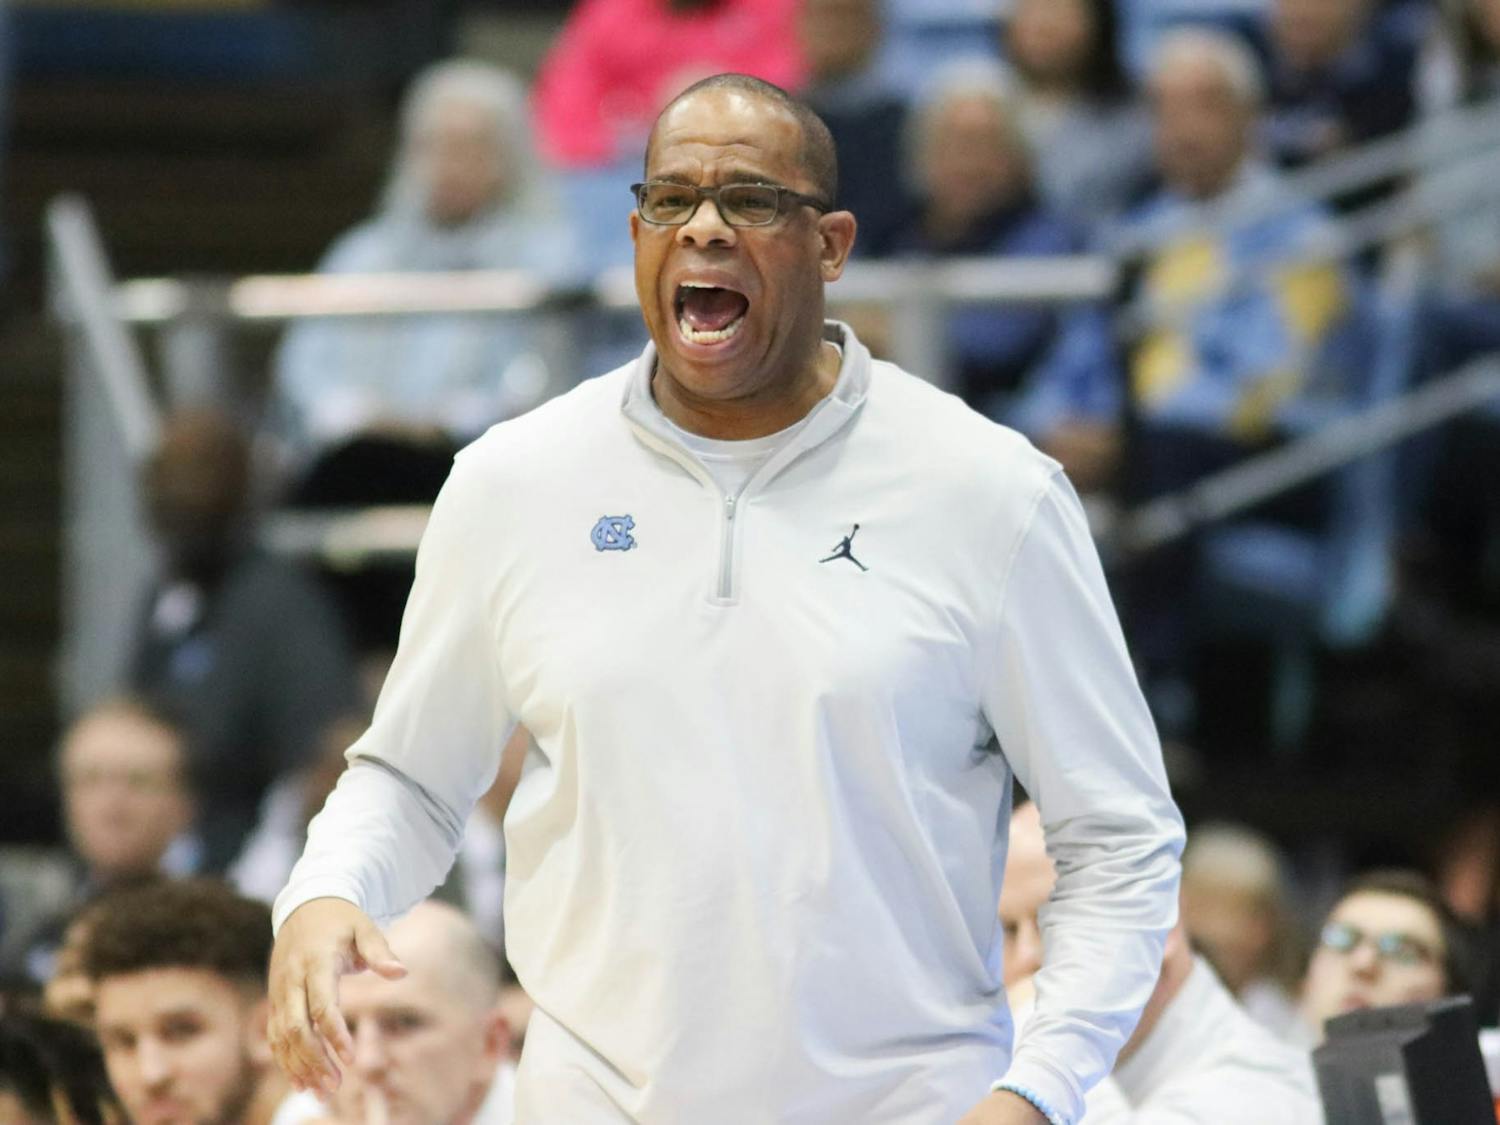 UNC Basketball Head Coach Huber Davis yells from the sideline during the men's basketball game against The Citadel at the Dean Smith Center on Tuesday, Dec. 13, 2022. UNC beat The Citadel 100-67.